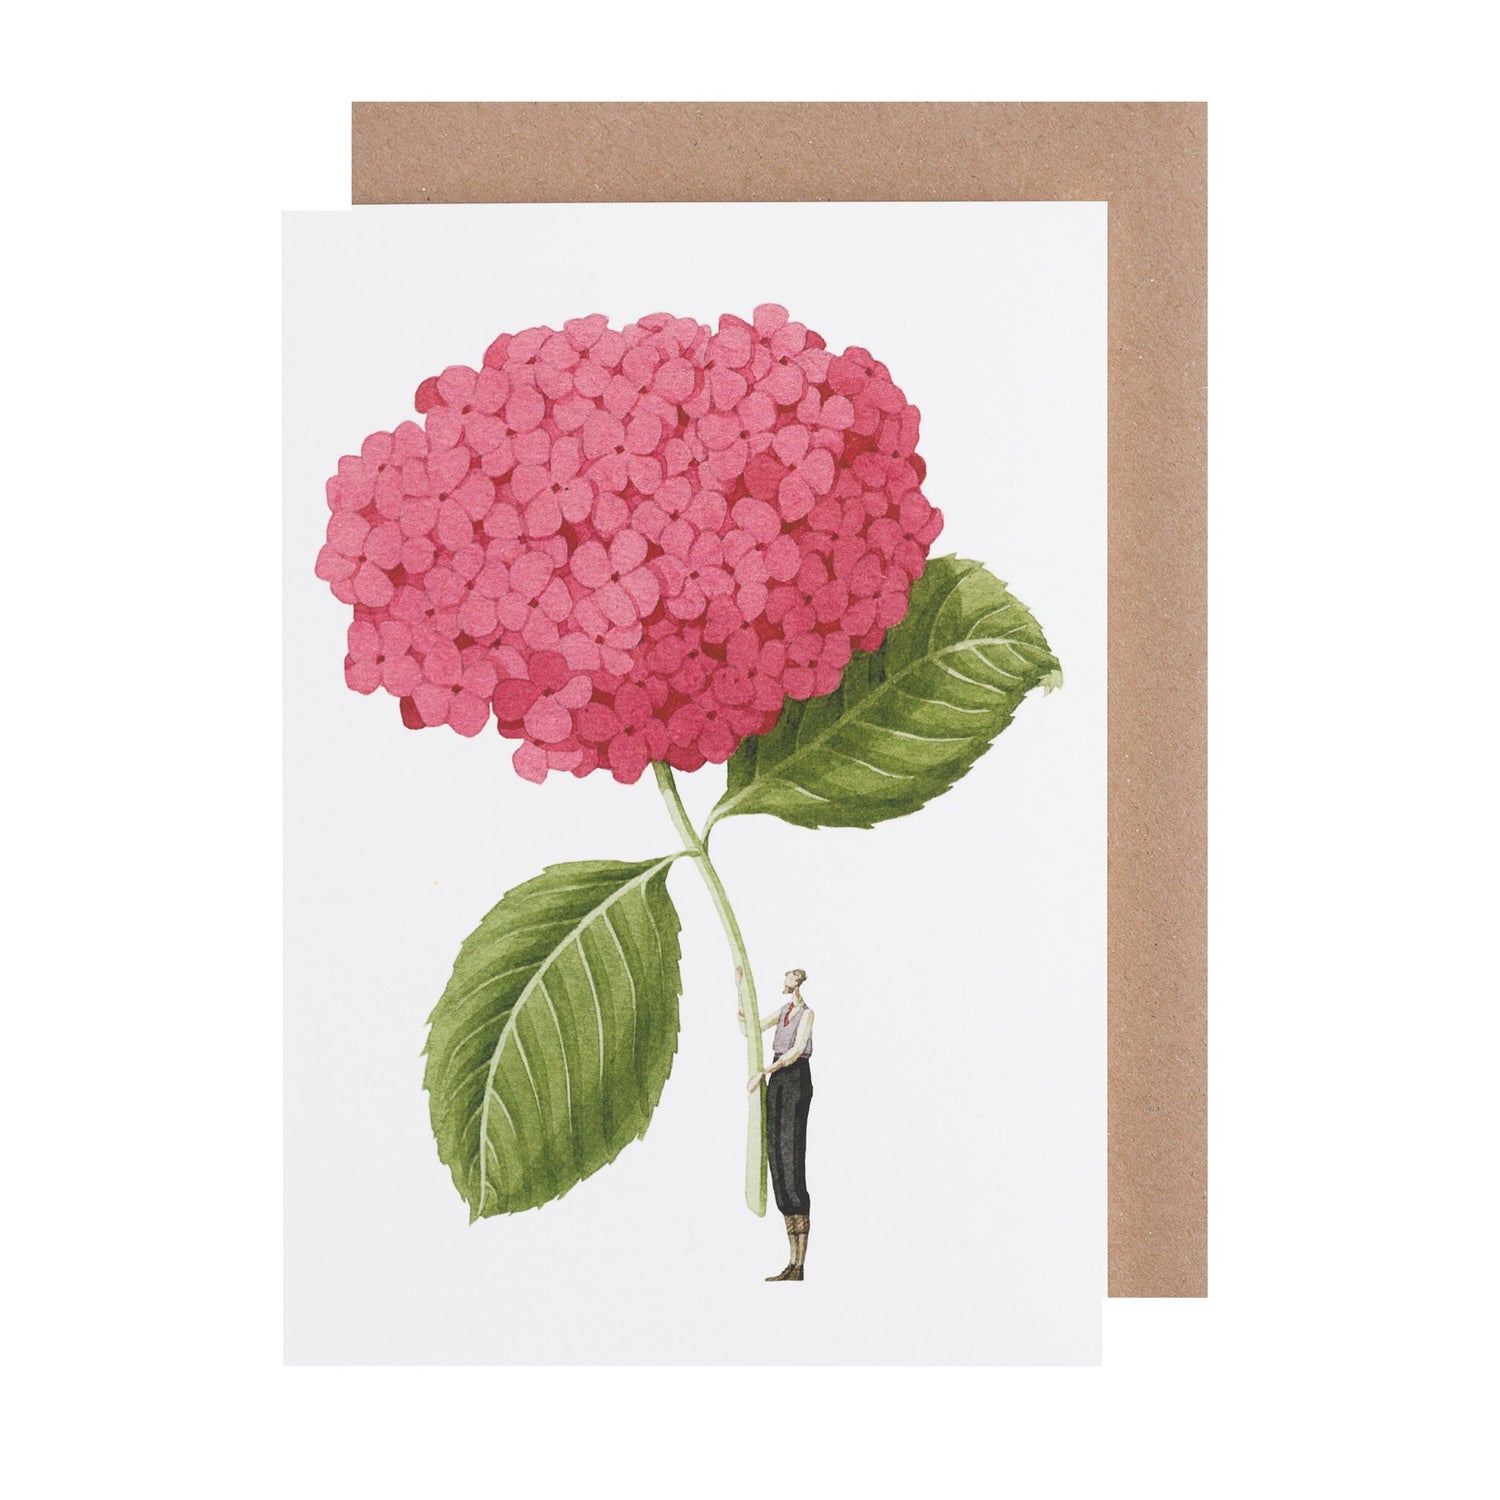 environmentally sustainable paper, compostable packaging, recycled paper, made in england, illustration, pink hydrangea, flowers